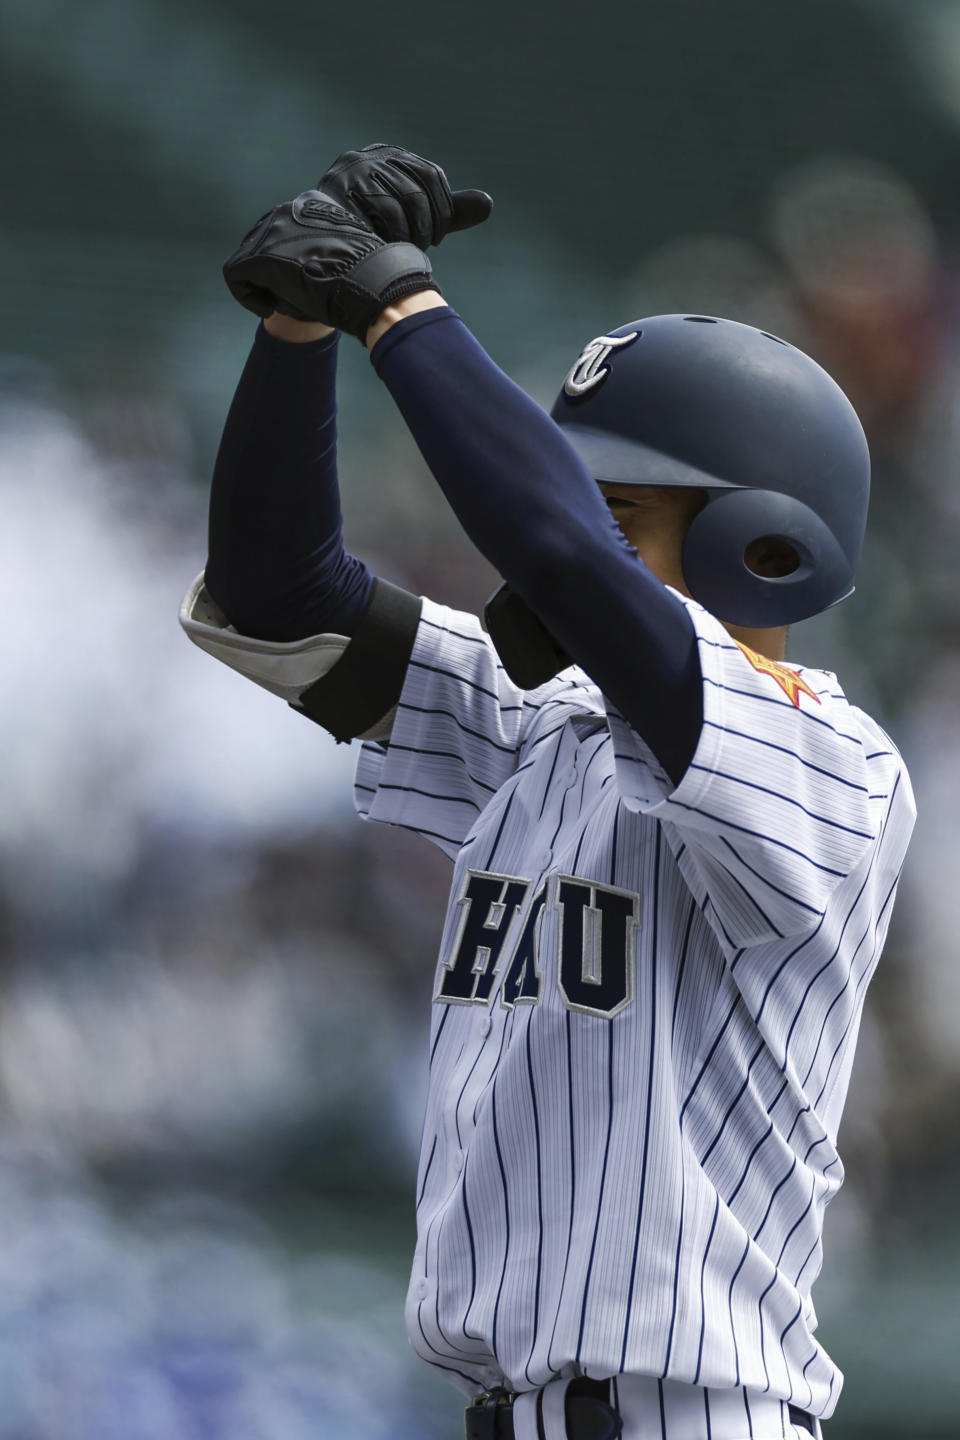 A player for Tohoku High School gestures after getting on first base during their game against Yamanashi Gakuin Senior High School at a stadium in Nishinomiya, Osaka, western Japan Saturday, March 18, 2023. Lars Nootbaar's imaginary pepper-grinder was the talk of World Baseball Classic games in Japan, but the fun-loving gesture by the St. Louis Cardinals outfielder does not appear welcome in Japan's popular high school baseball tournament.(Kyodo News via AP)